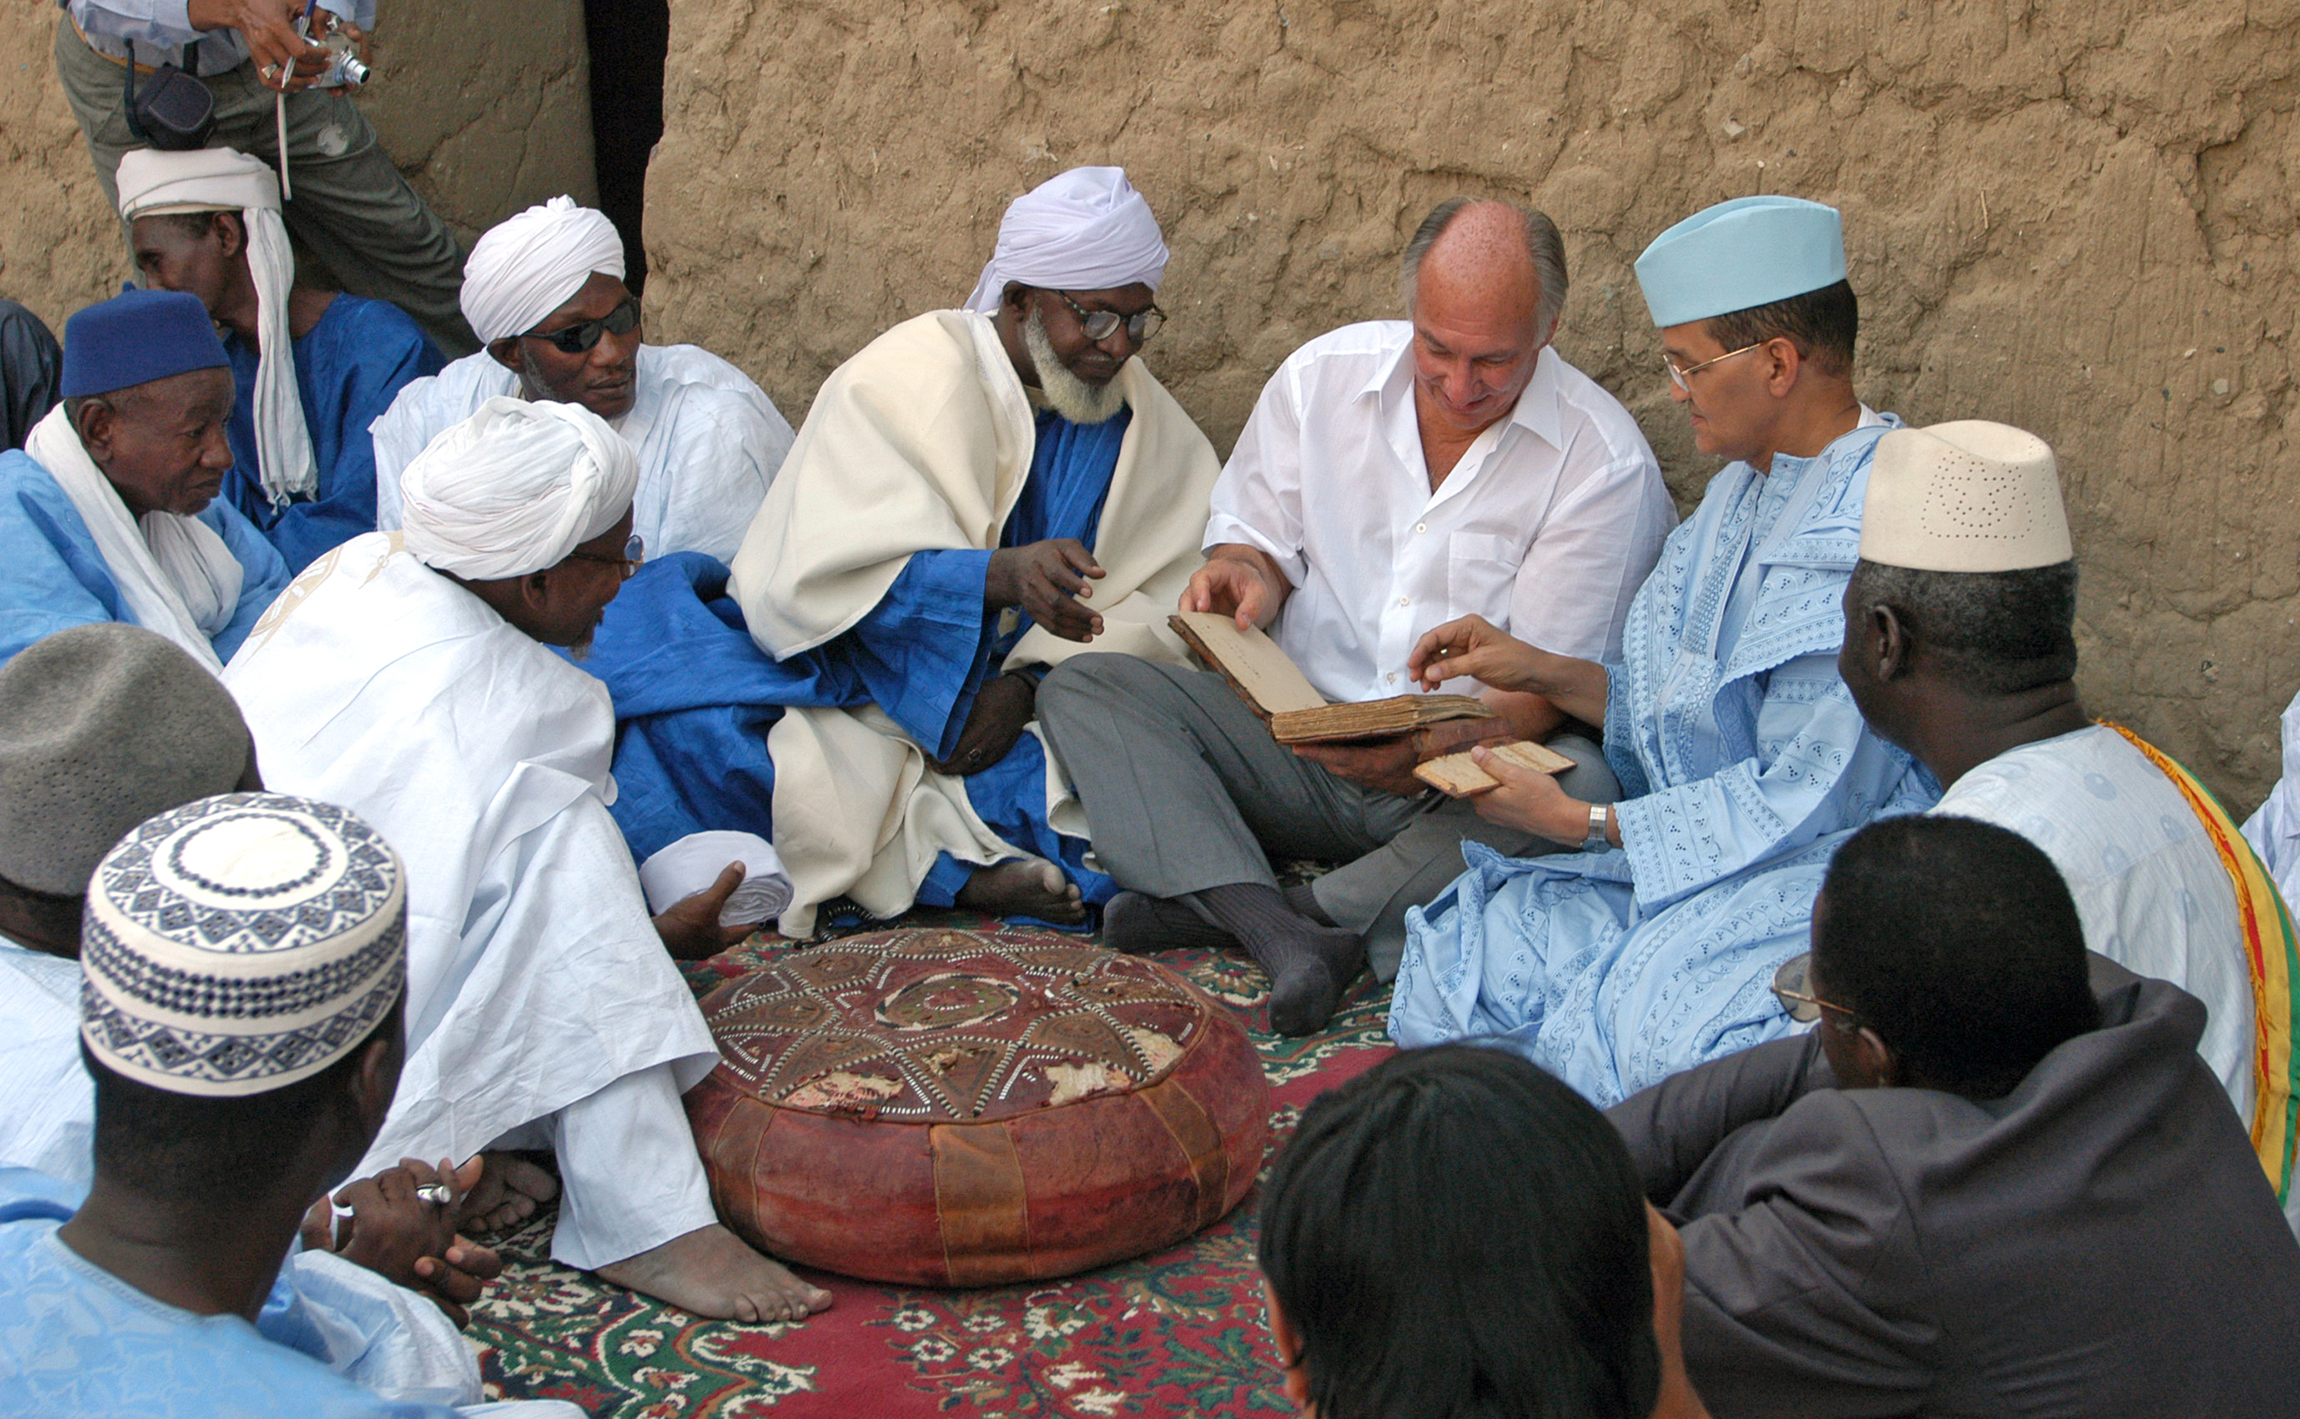 The Aga Khan surrounded by the Prime Minister of Mali and the Imam of the Djingareyber Mosque of Timbuktu (Mali) in 2003. The conservation work of this 14th century UNESCO World Heritage monument was financed by the Aga Khan Trust for Culture.